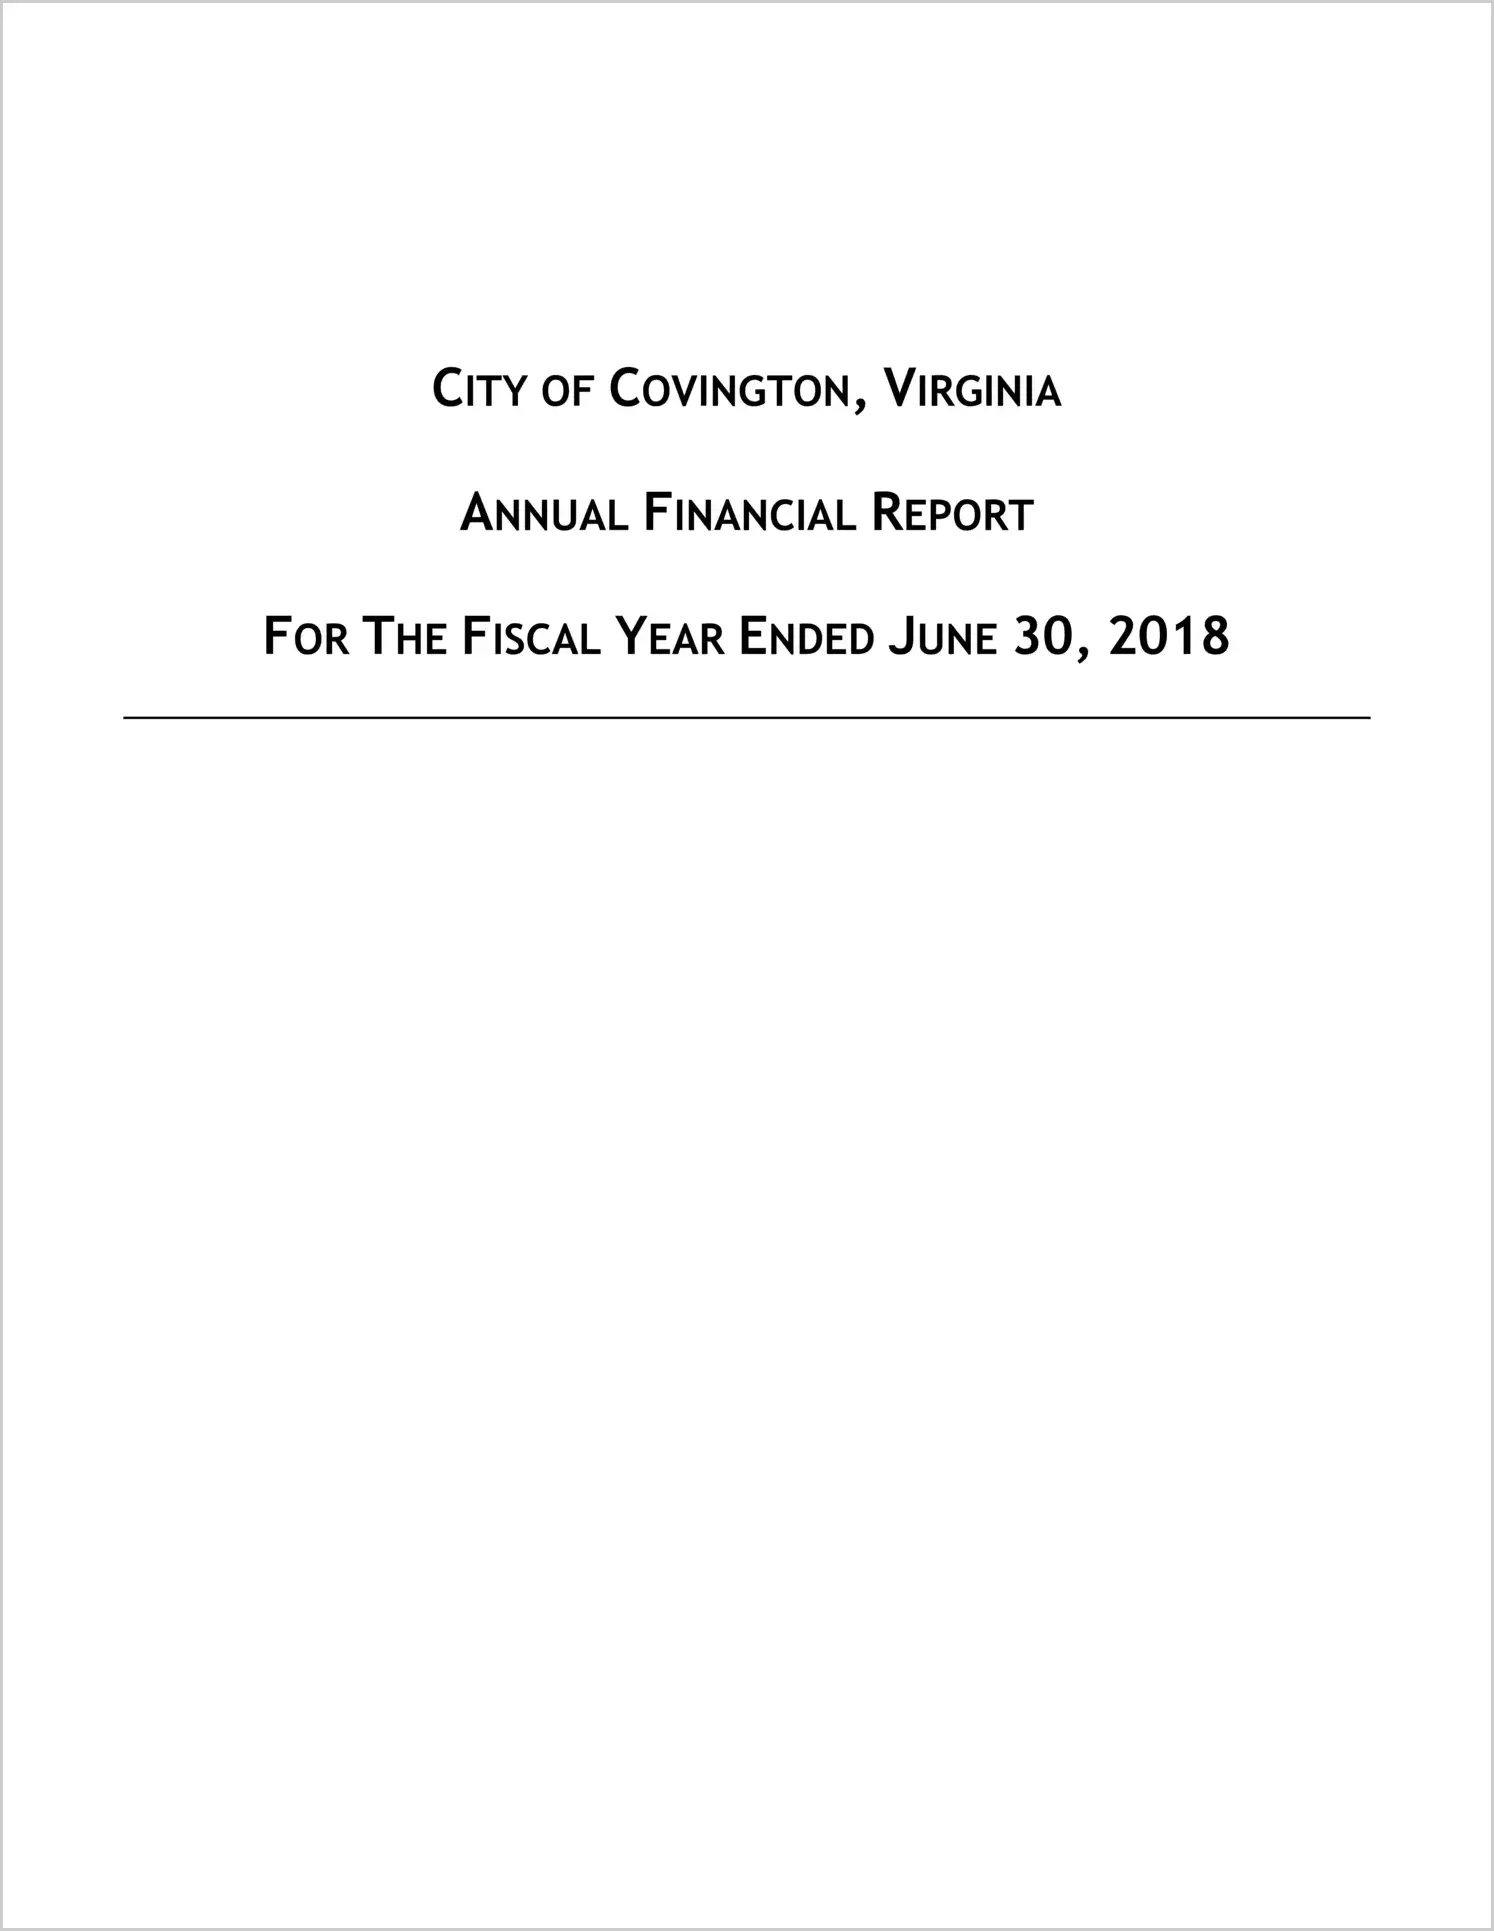 2018 Annual Financial Report for City of Covington